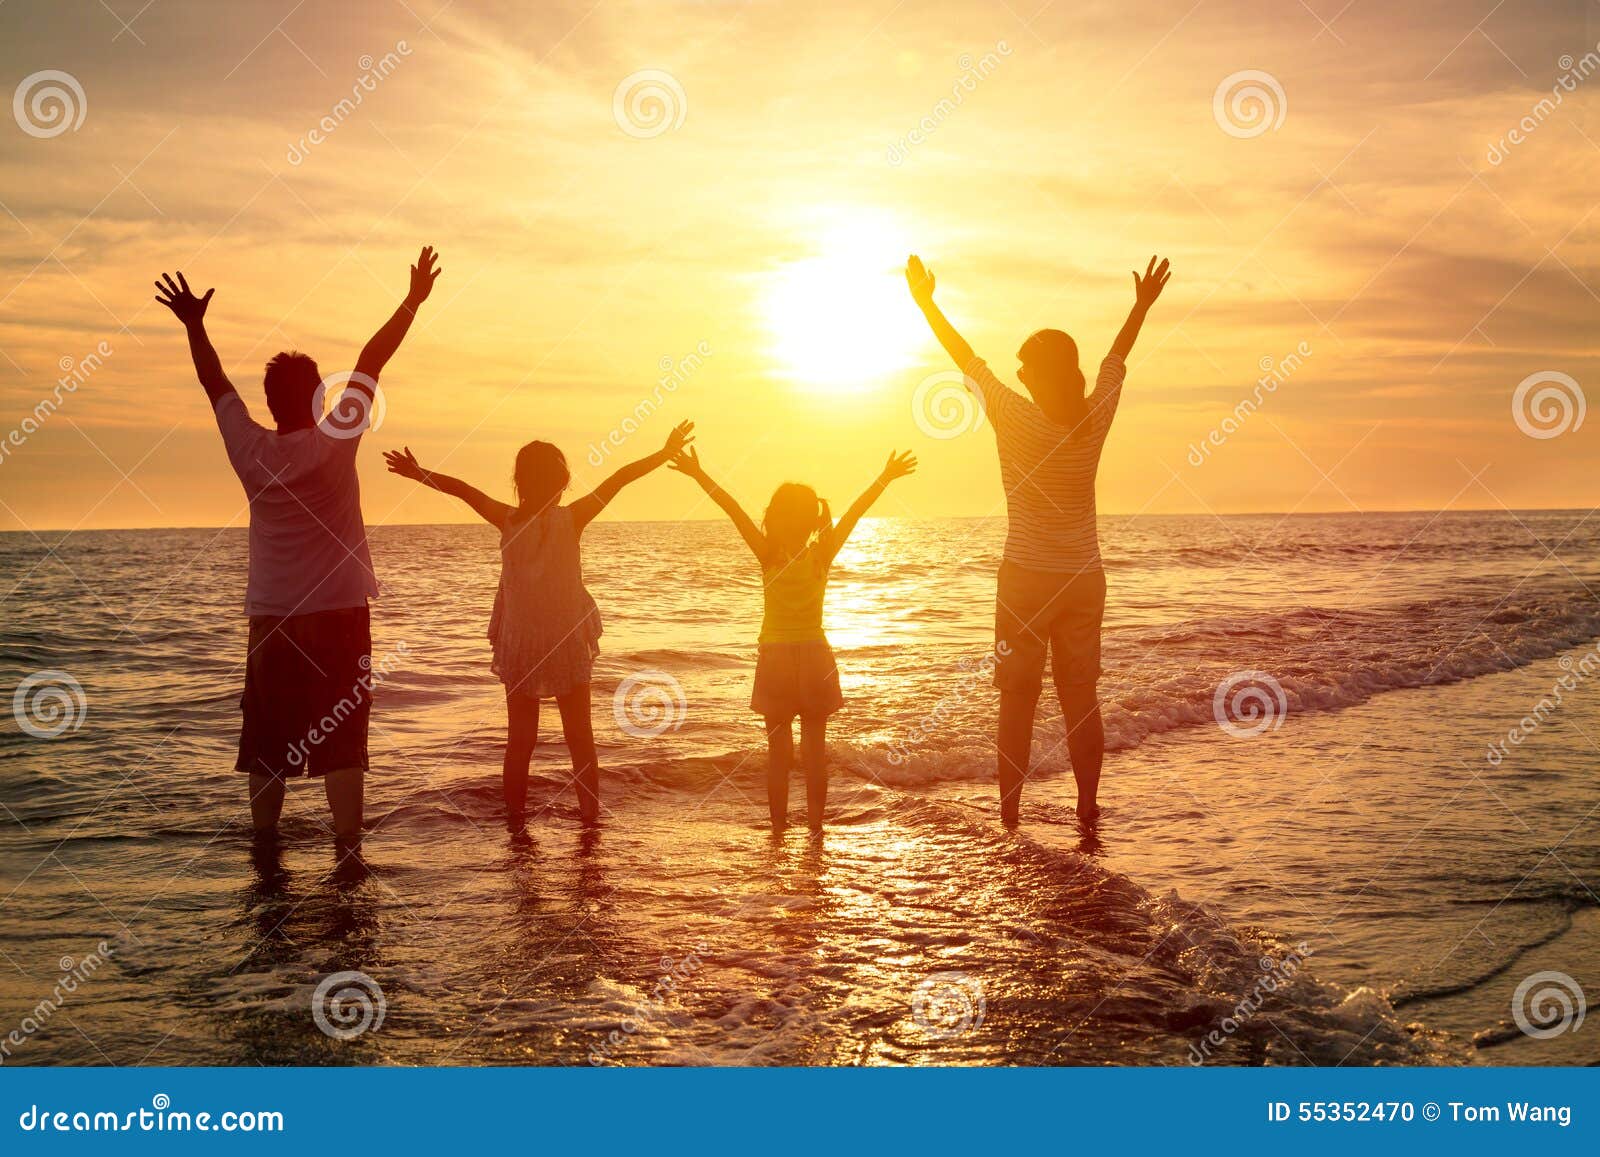 happy family watching the sunset on the beach